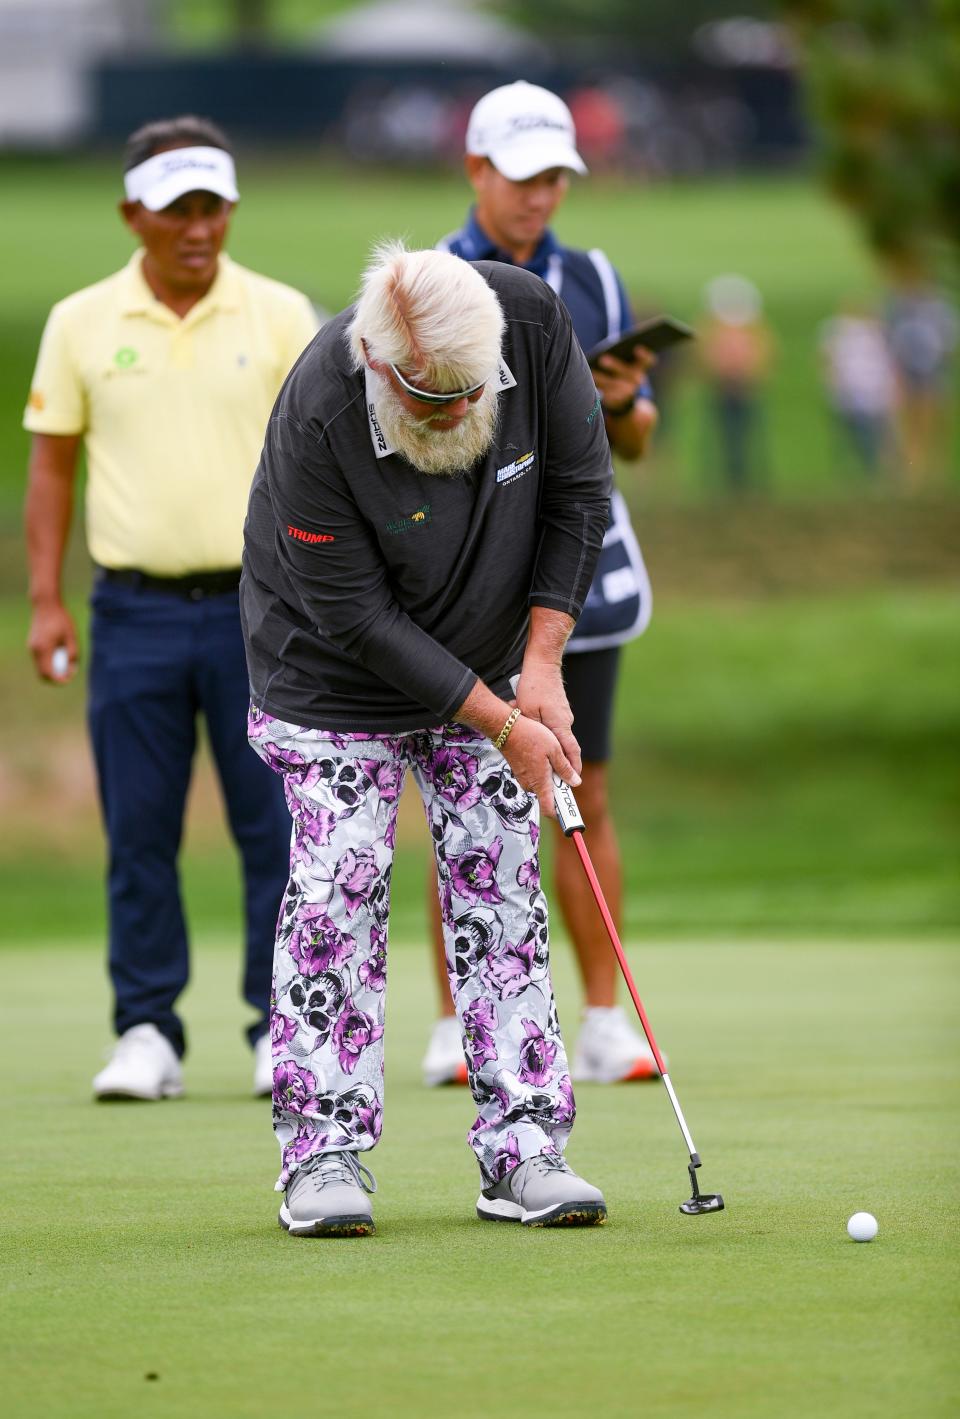 John Daly putts on the first day of the Sanford International on Friday, September 16, 2022, at the Minnehaha Country Club in Sioux Falls.